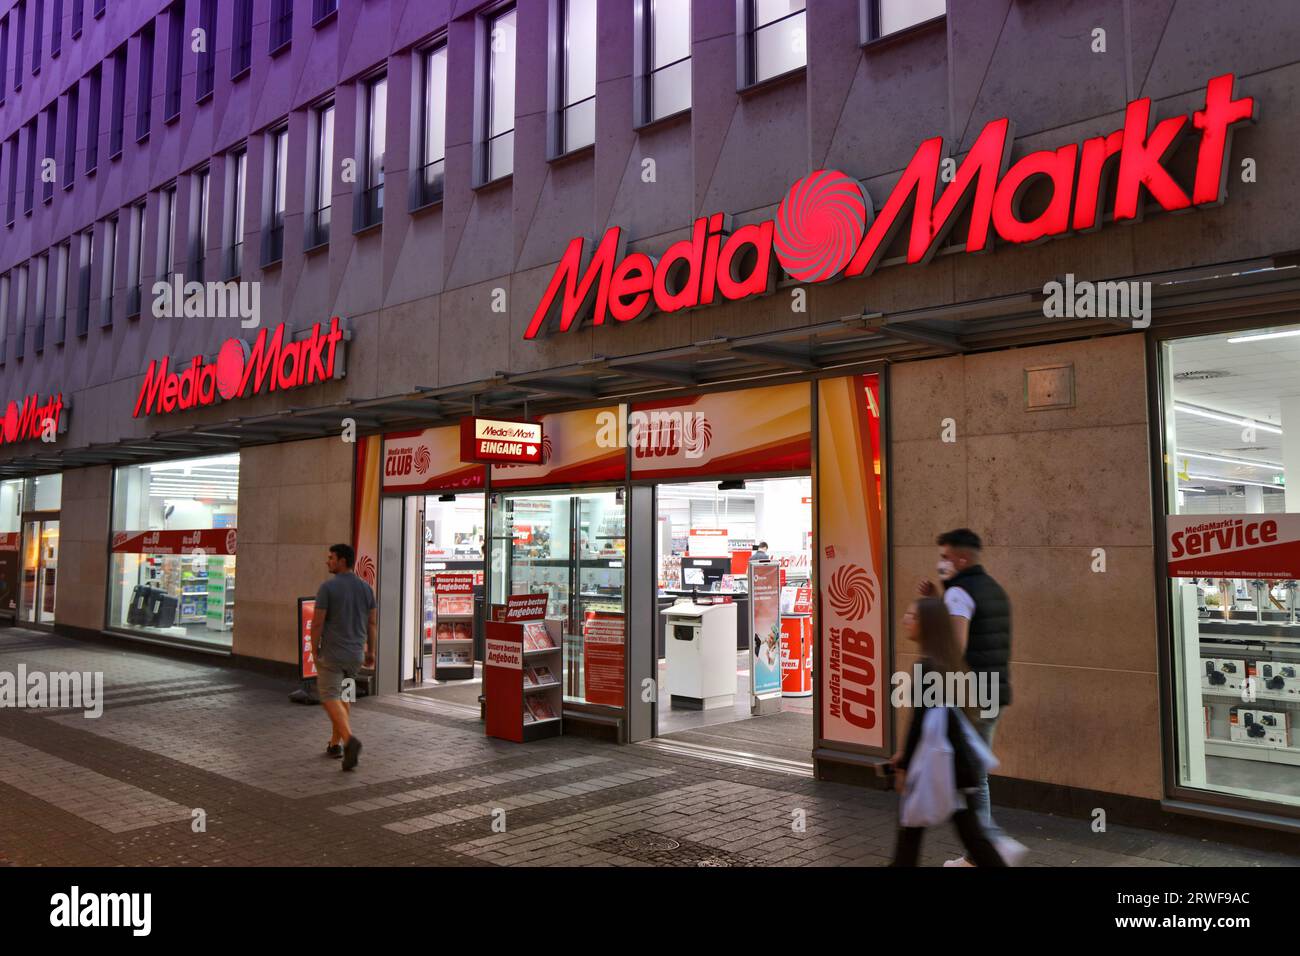 Qwintry - Media Markt is a German store, so all you orders should be placed  to our warehouse in Berlin. The website, of course, is mediamarkt.de. And,  like any large online store